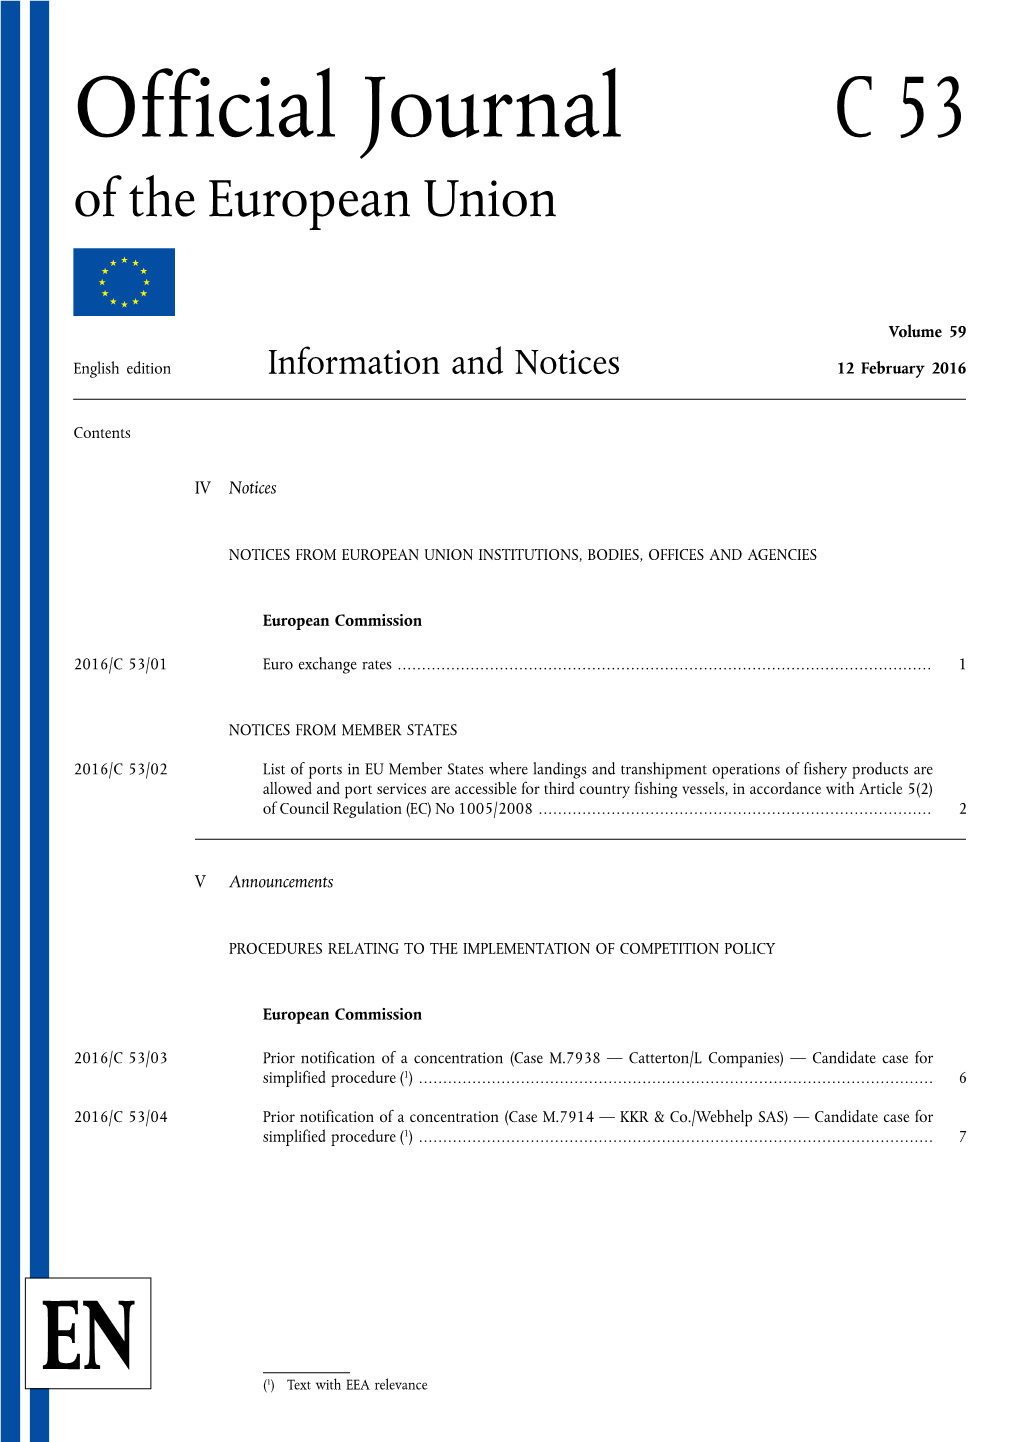 Official Journal C 53 of the European Union